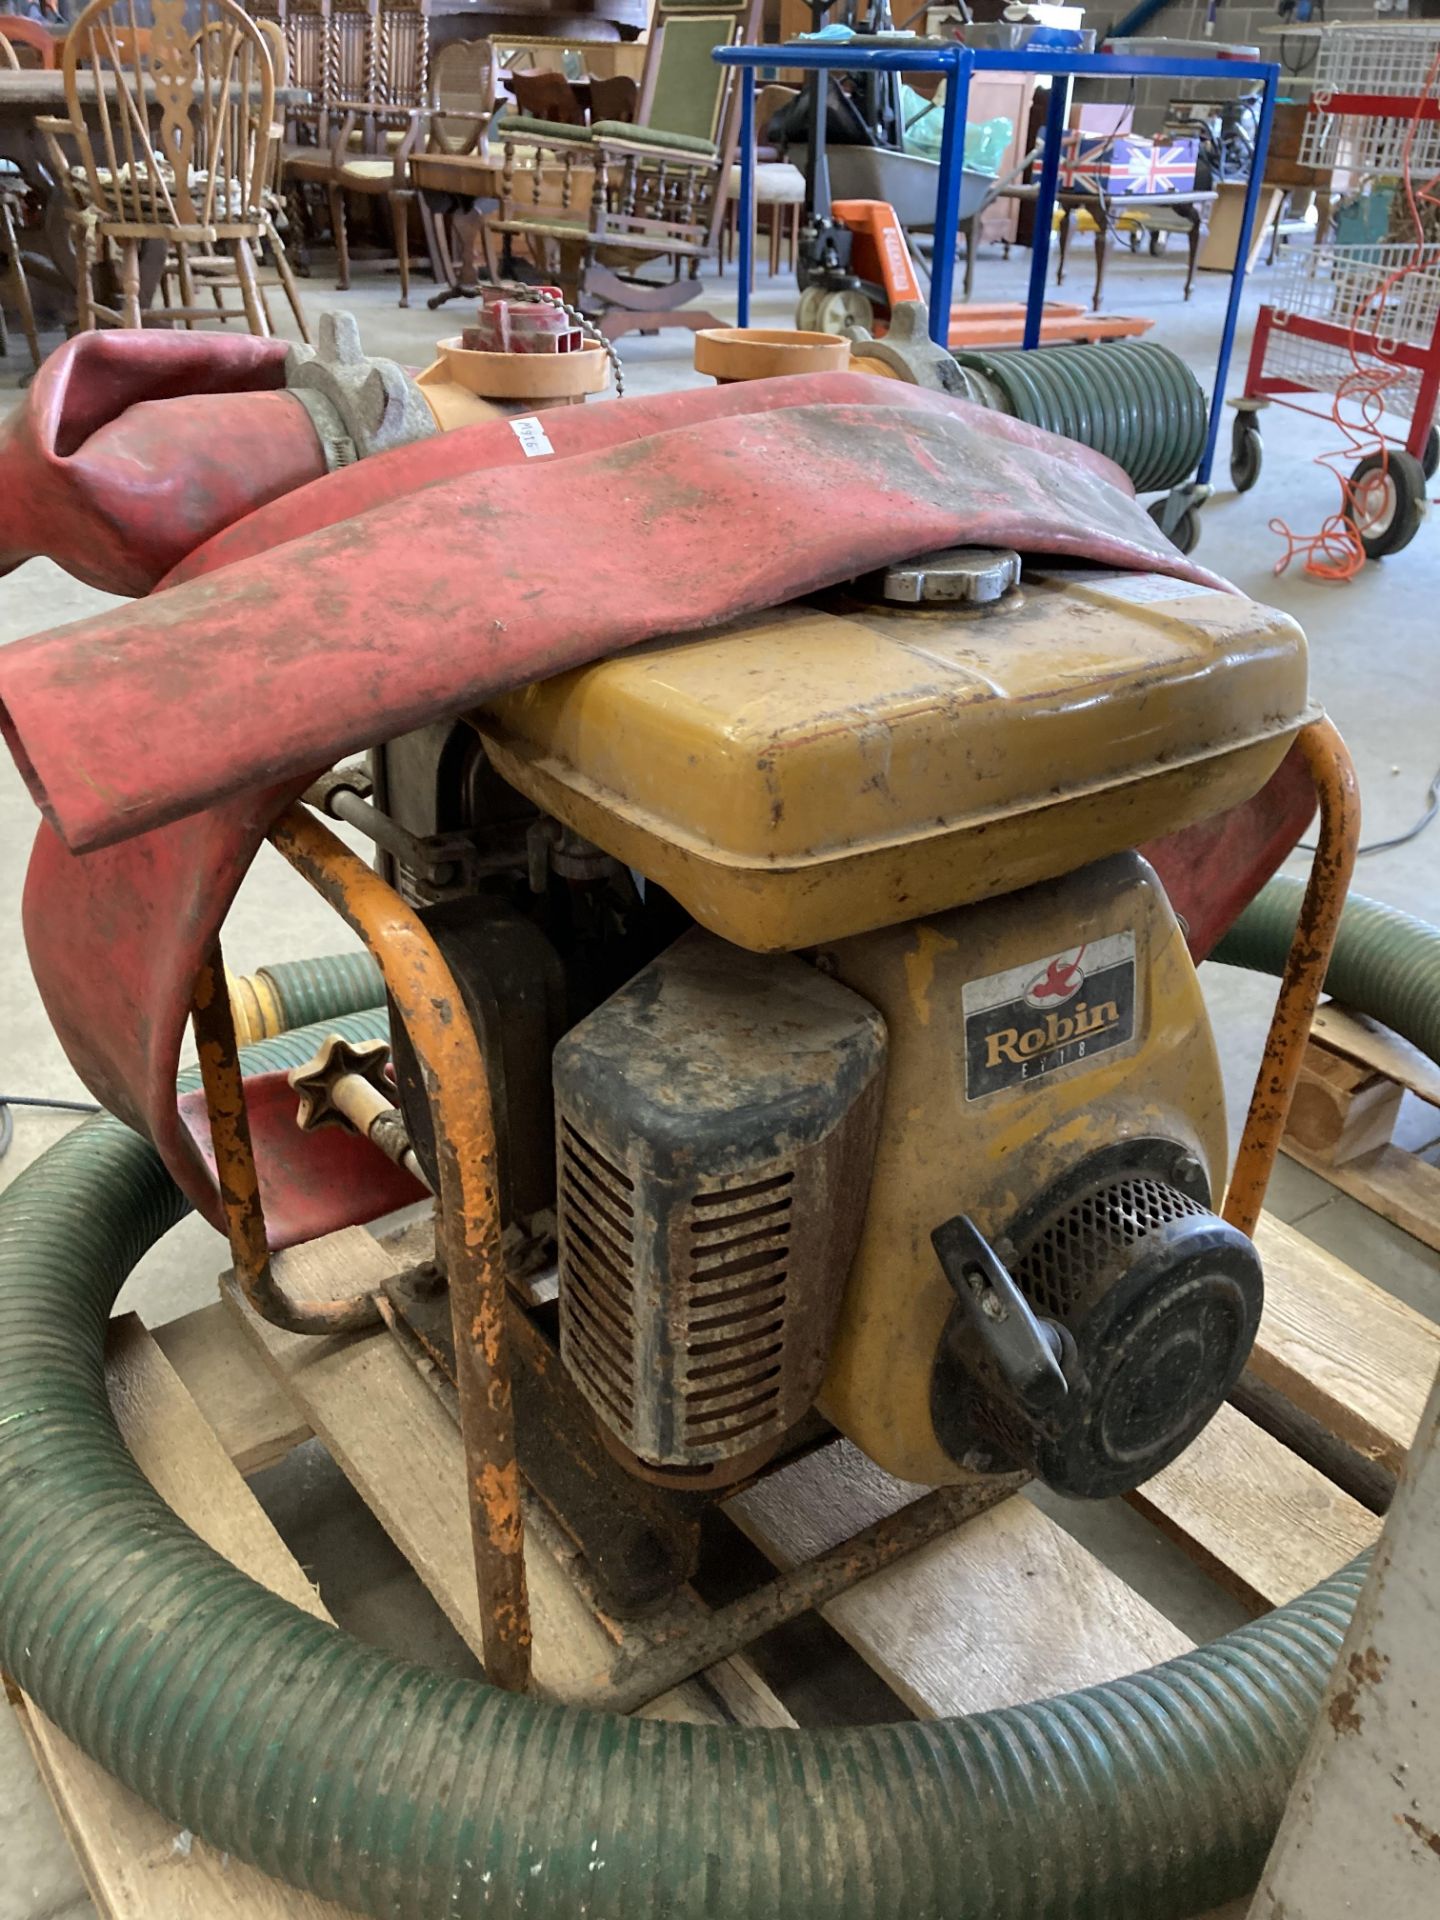 A Robin petrol water pump with hose - not tested (in saleroom) - Image 3 of 3